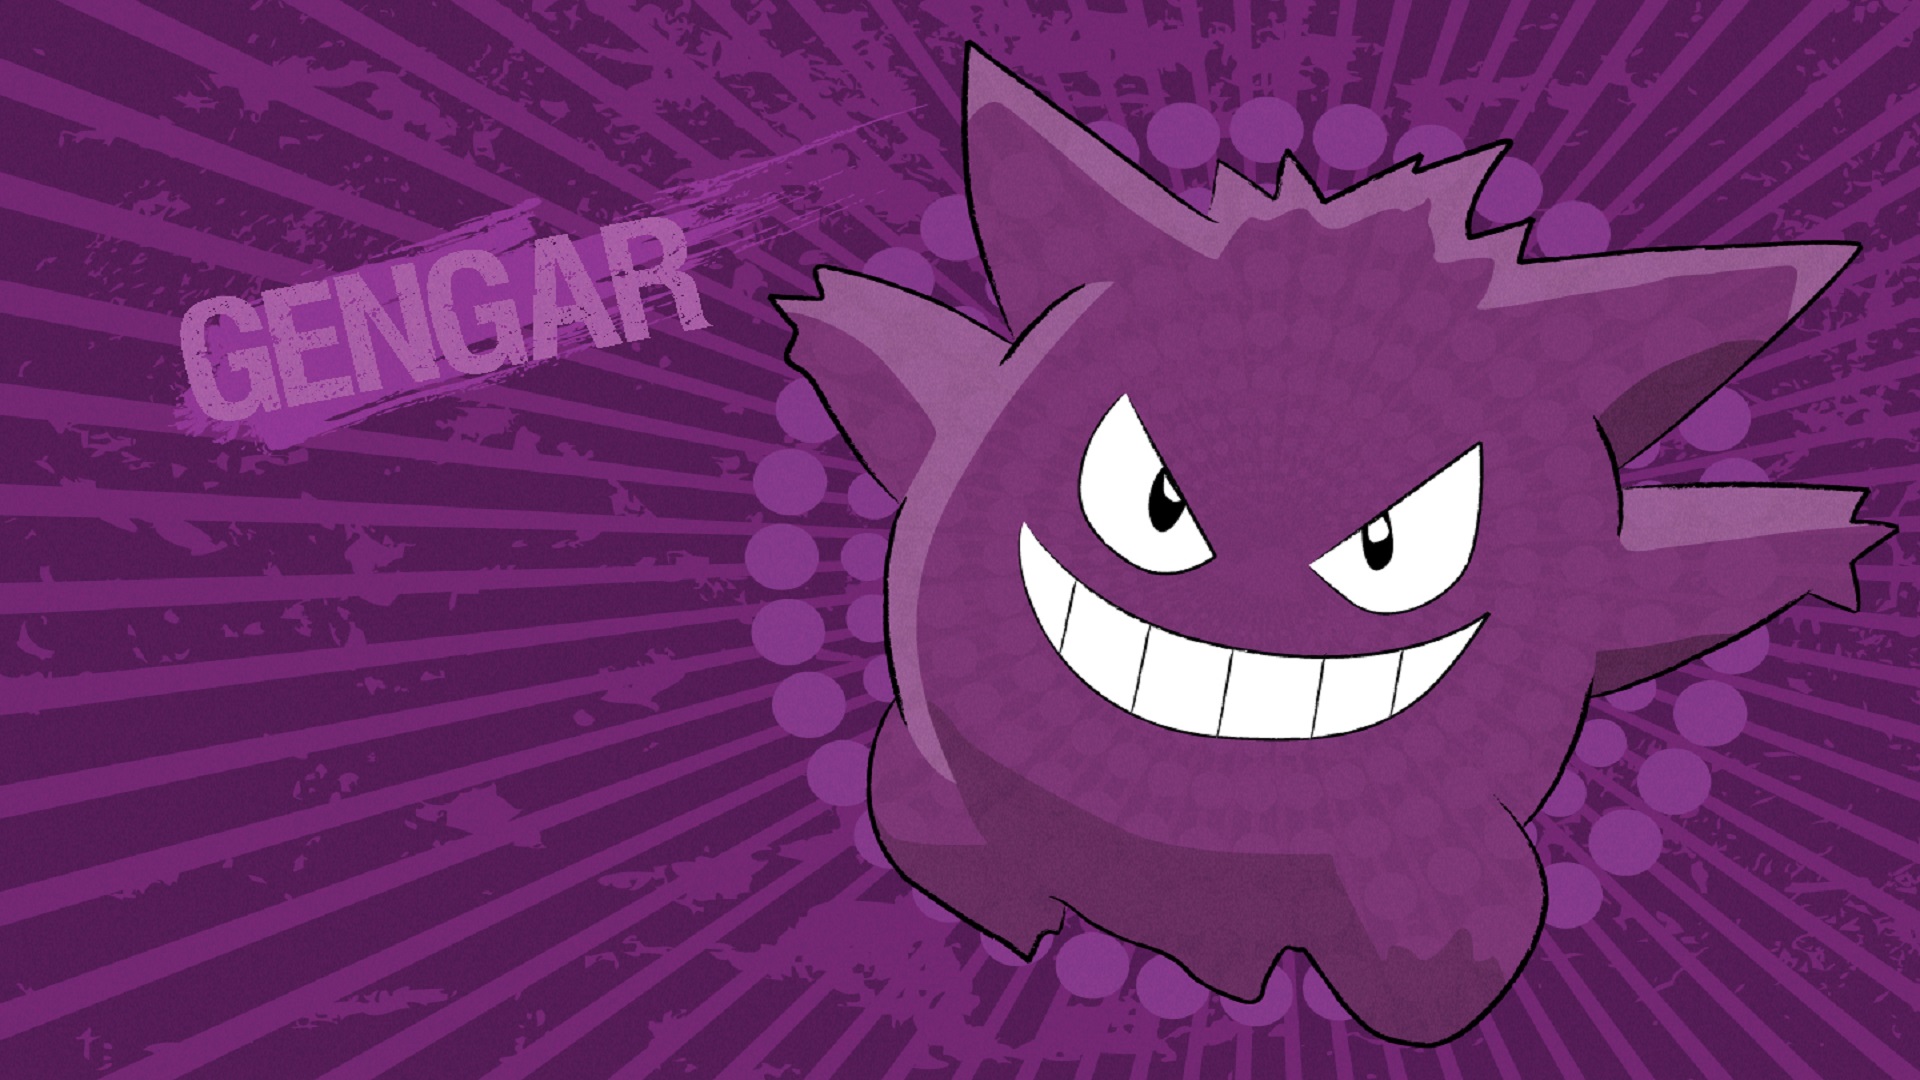 Download Experience the electrifying energy of Gengar in concert  Wallpaper  Wallpaperscom